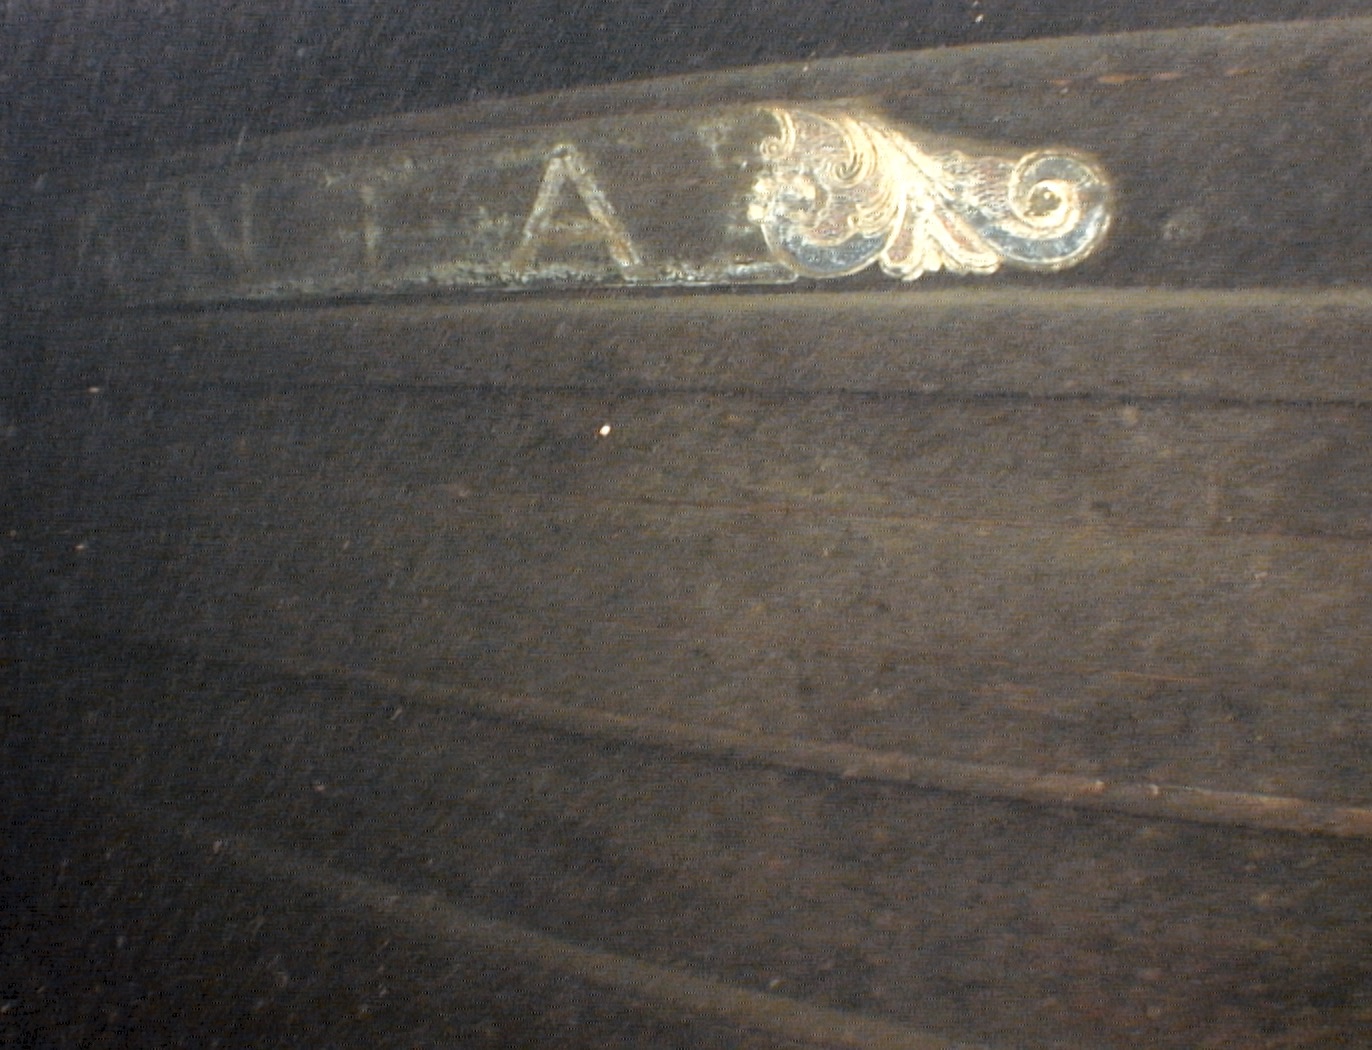 Shipwreck hunters found The Atlanta claimed by Lake Superior in 1981